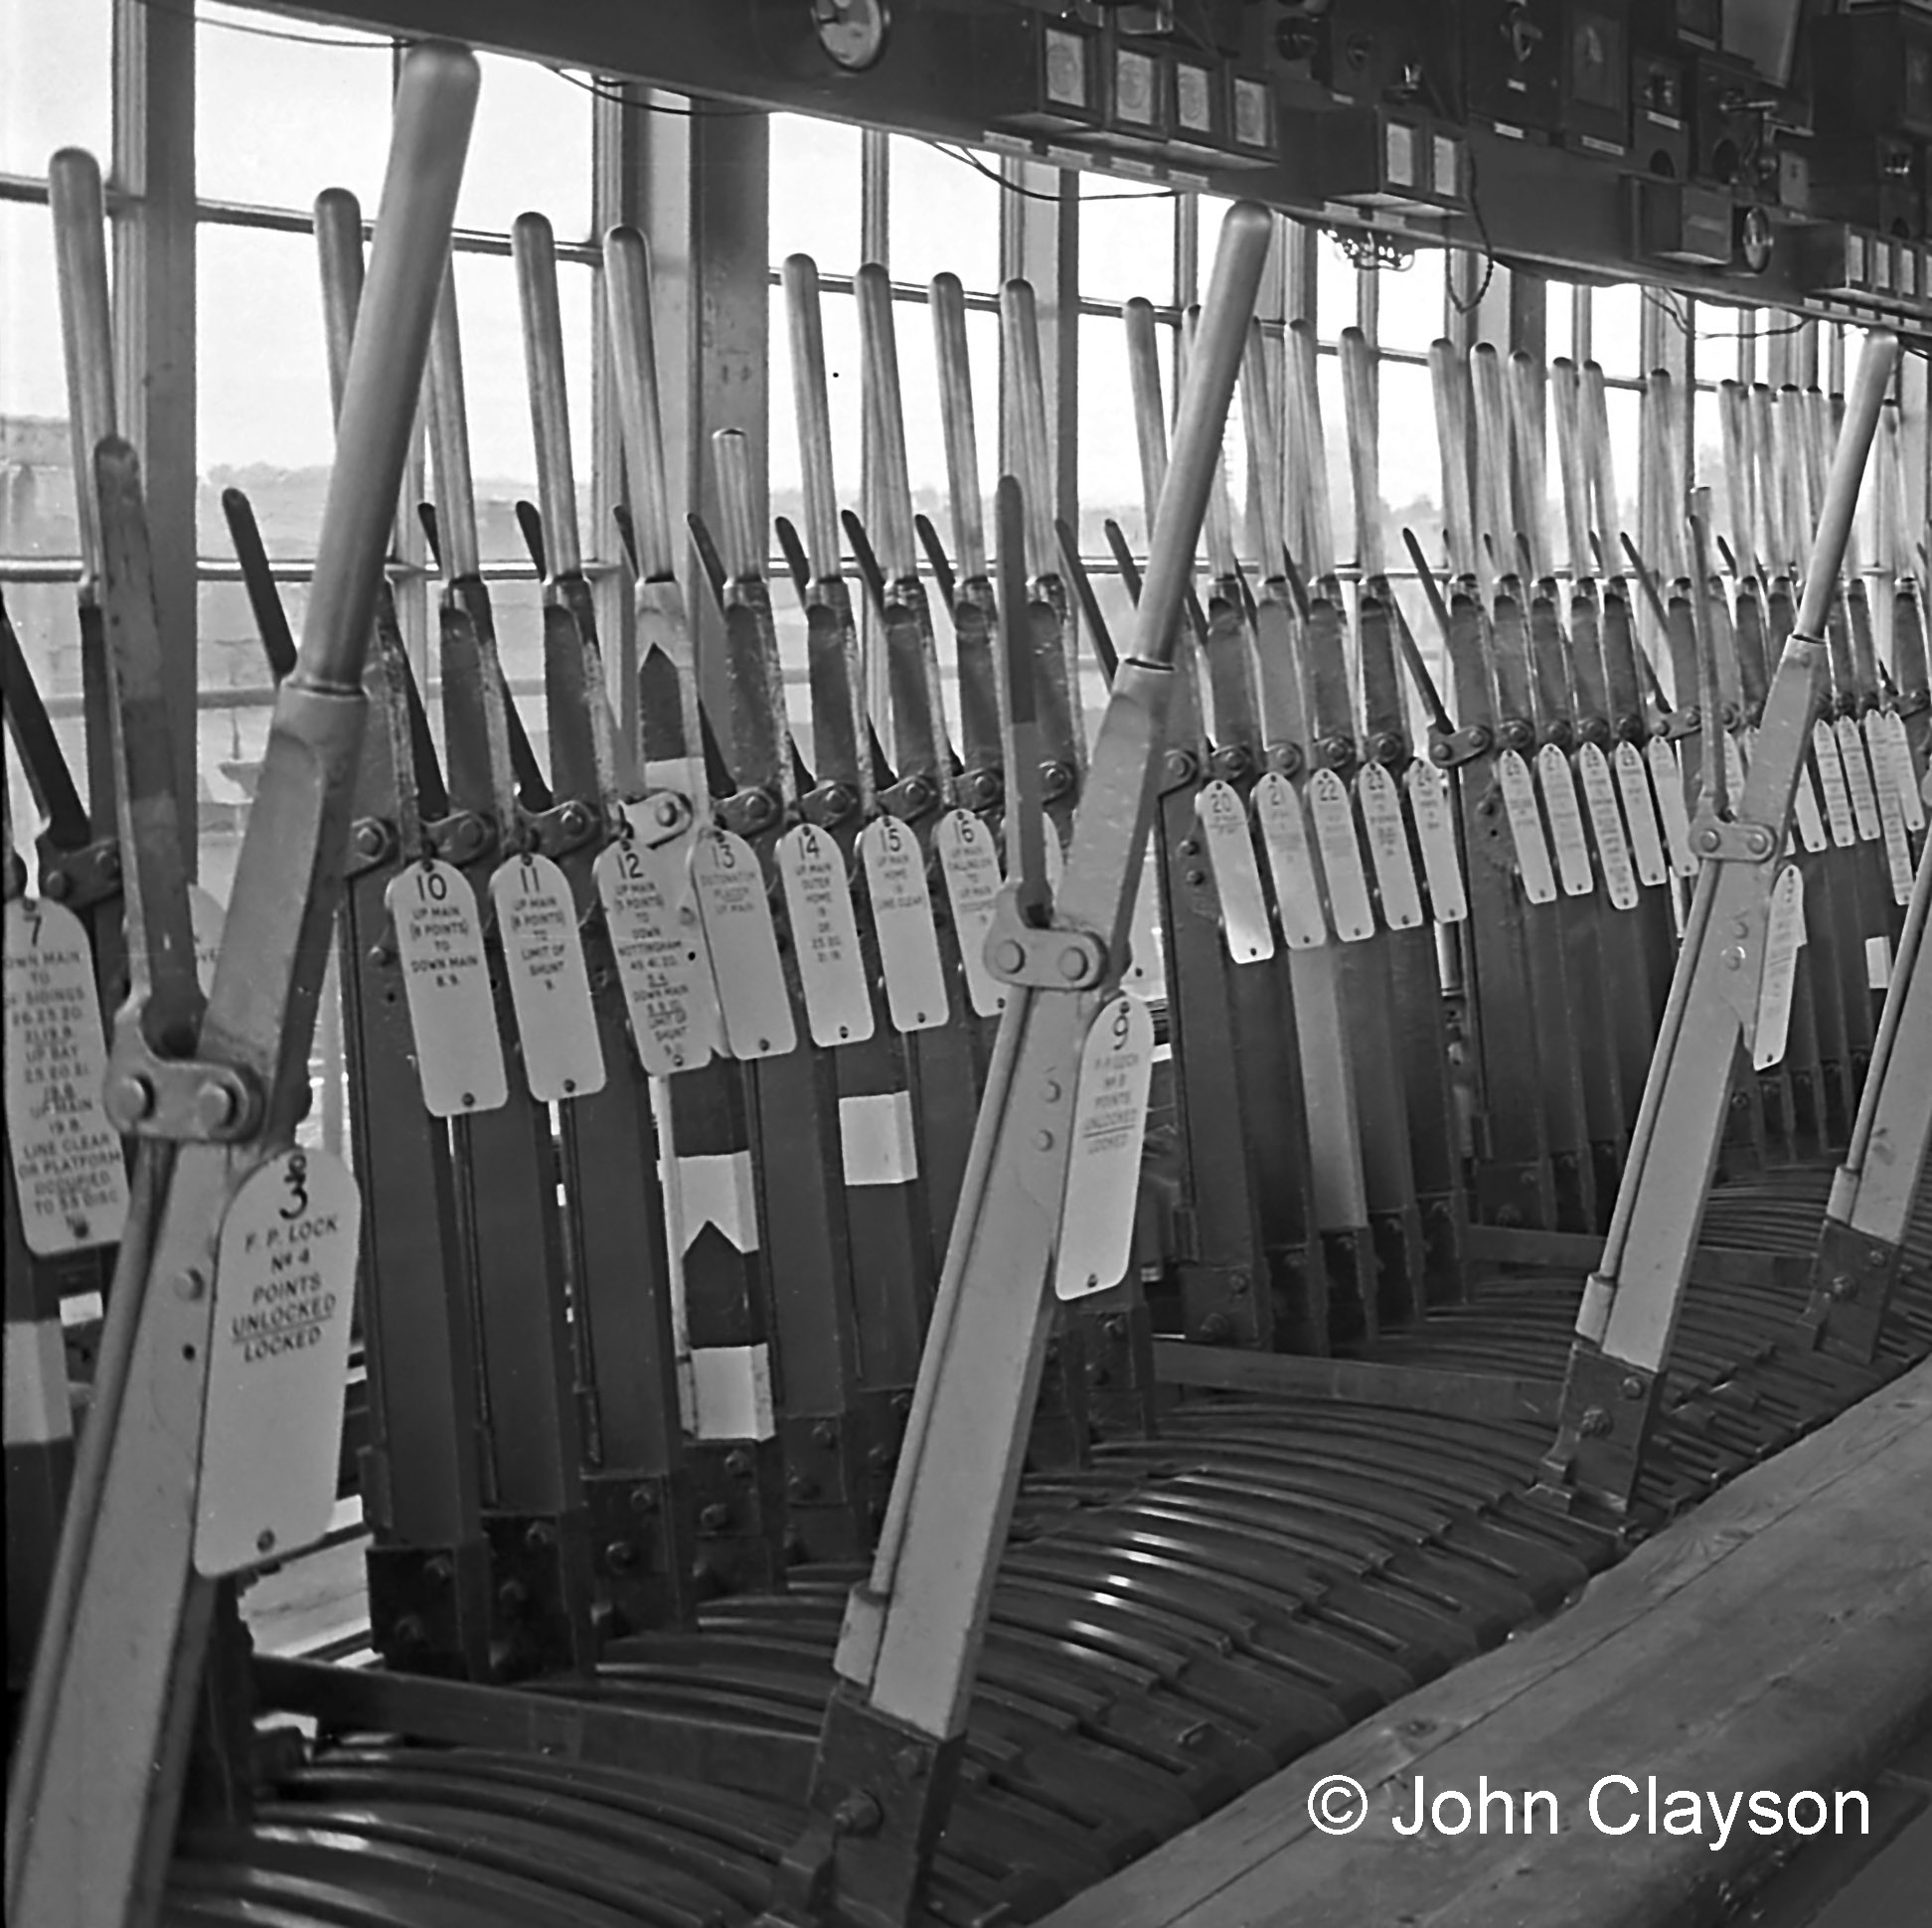 Here is the north end of the lever frame at Grantham North box on 22nd August 1963. Levers in a signal box are all numbered, and also painted in colours according to their purpose. For those of us who are viewing in black and white (as snooker commentator Ted Lowe might say), the red levers (e.g. 10, 11, 12, 14, 15 & 16) control stop, calling-on or shunt signals, the black levers (e.g. 20 & 21) are for points, and the blue levers (e.g. 3, 9, 19 & 22) are for facing point locks (which are a safety device to lock points in place once they are set). The lever with black and white stripes and a chevron, 13, is for a detonator placer on the Up Main line – an emergency device that places a small explosive charge (detonator) on the rail. The detonator explodes when run over by a train’s wheels, warning the driver of danger. The information on the lever plates tells us that levers in this part of the frame control some of the signals and points relating to the Up Main line seen in the photograph next above. For example: 15 UP MAIN HOME is the topmost of the signals which the train is passing; the white band on the lever shows that it is interlocked electrically with the block telegraph (as well as mechanically in the lever frame). 16 UP MAIN CALLING-ON TO UP MAIN OCCUPIED is the small signal on the same post, beneath the distant signal. Moving closer to the camera, the two disc signals visible against the third coach are (left to right): 10 UP MAIN TO DOWN MAIN (relates to a trailing crossover hidden under the train). 11 UP MAIN TO LIMIT OF SHUNT. Closer still: 19, 20, 21 & 22 control the points for the connection to the Up bay platform, in the right foreground. Photograph by Cedric A. Clayson.